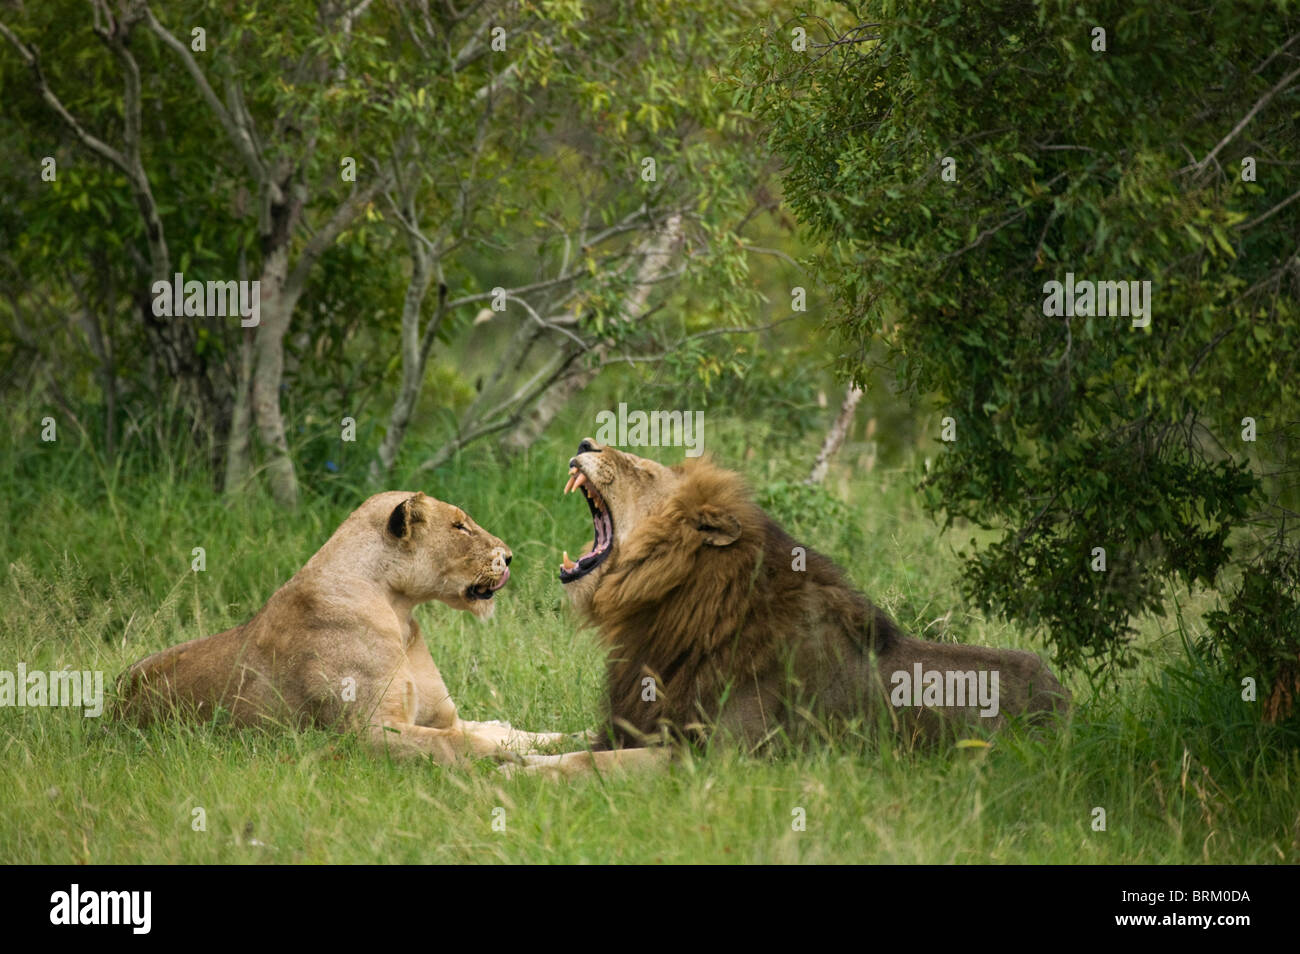 A male lion yawning while resting with a lioness in dense bushveld Stock Photo